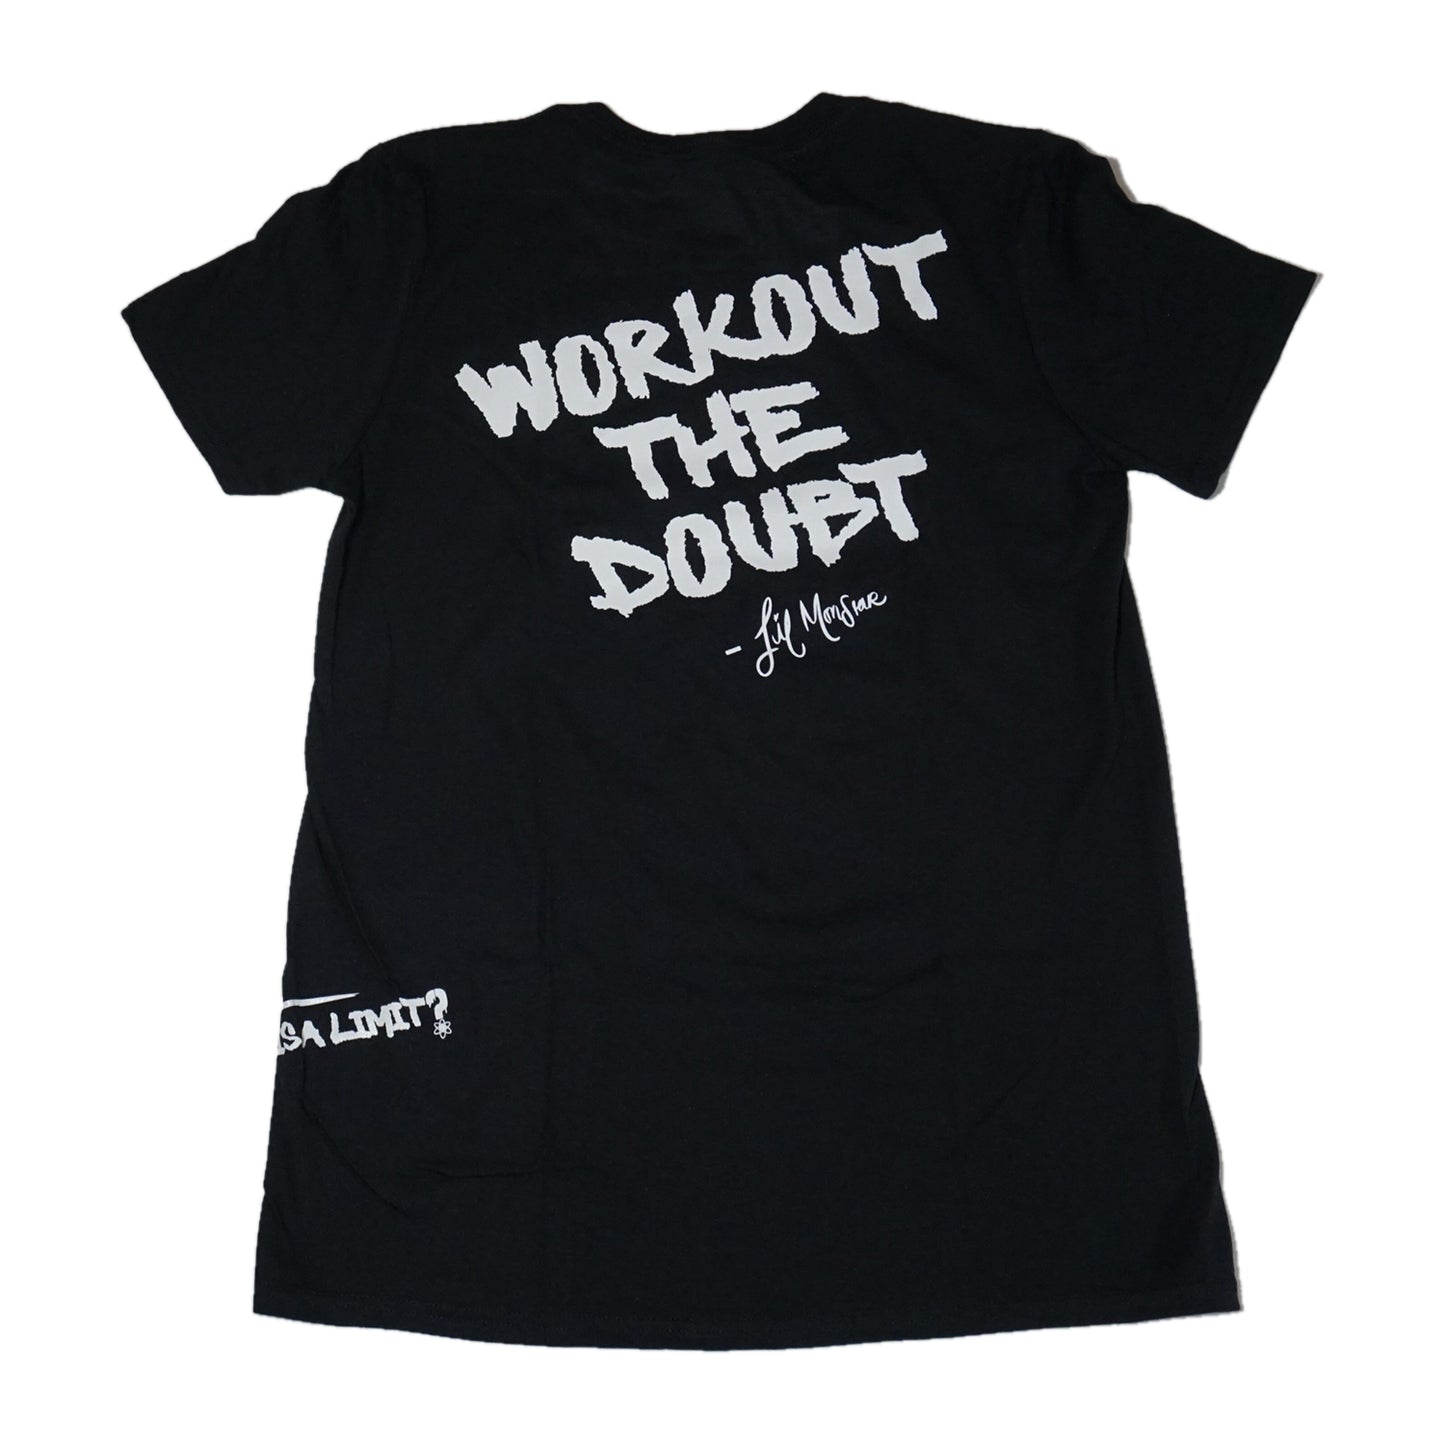 Black T-Shirt: "Workout the Doubt-WTF is a Limit?" - Lil Monstar Edition